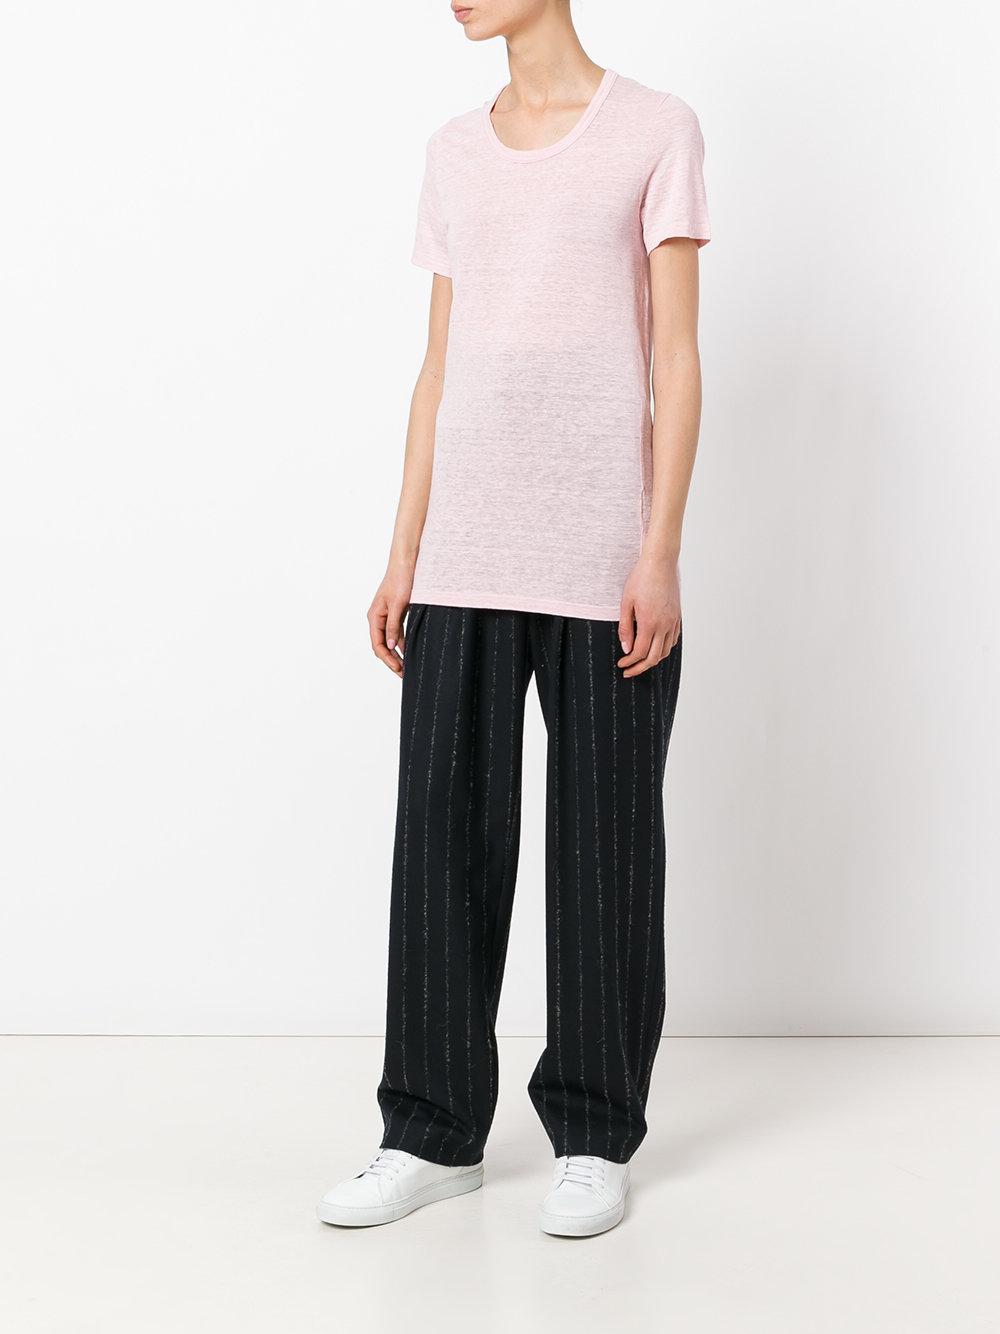 Étoile isabel marant Classic T-shirt in Pink | Lyst